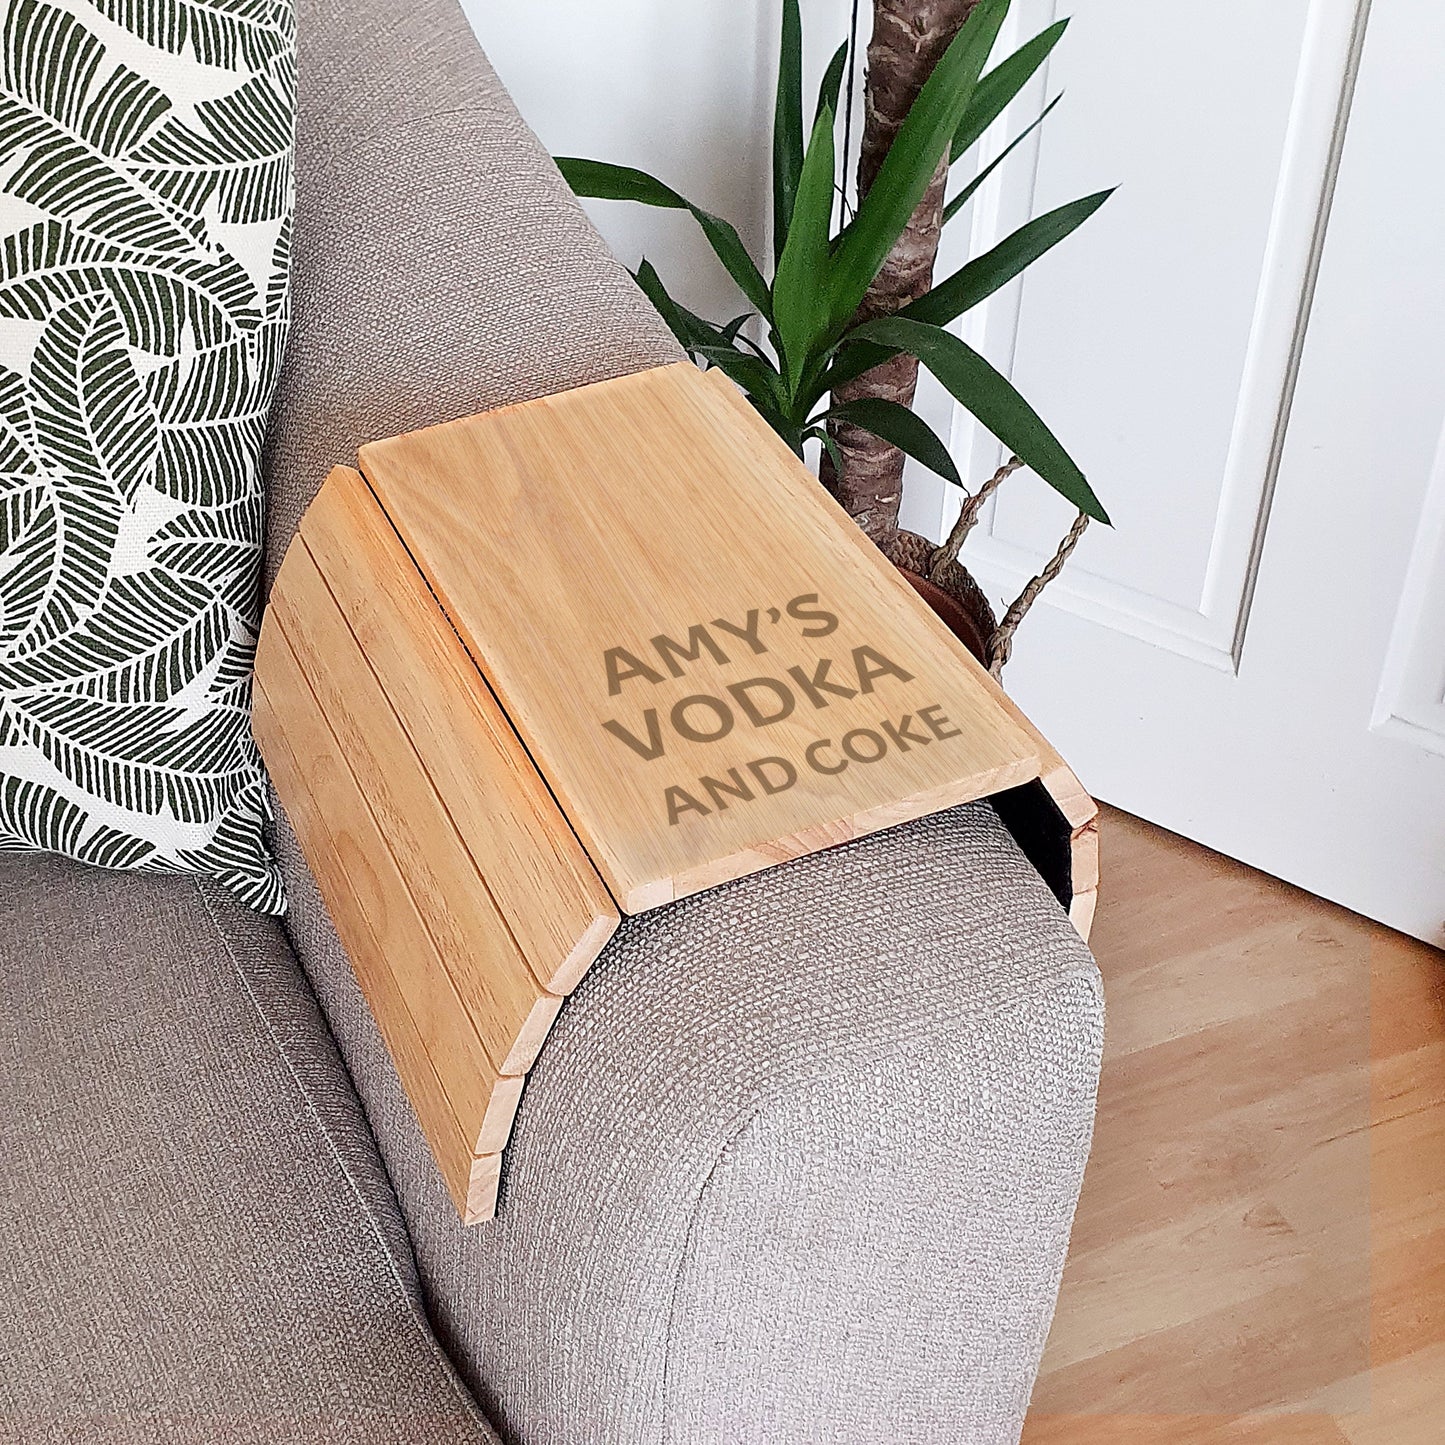 Personalised wooden sofa arm tray Vodka and coke By Sweetlea Gifts